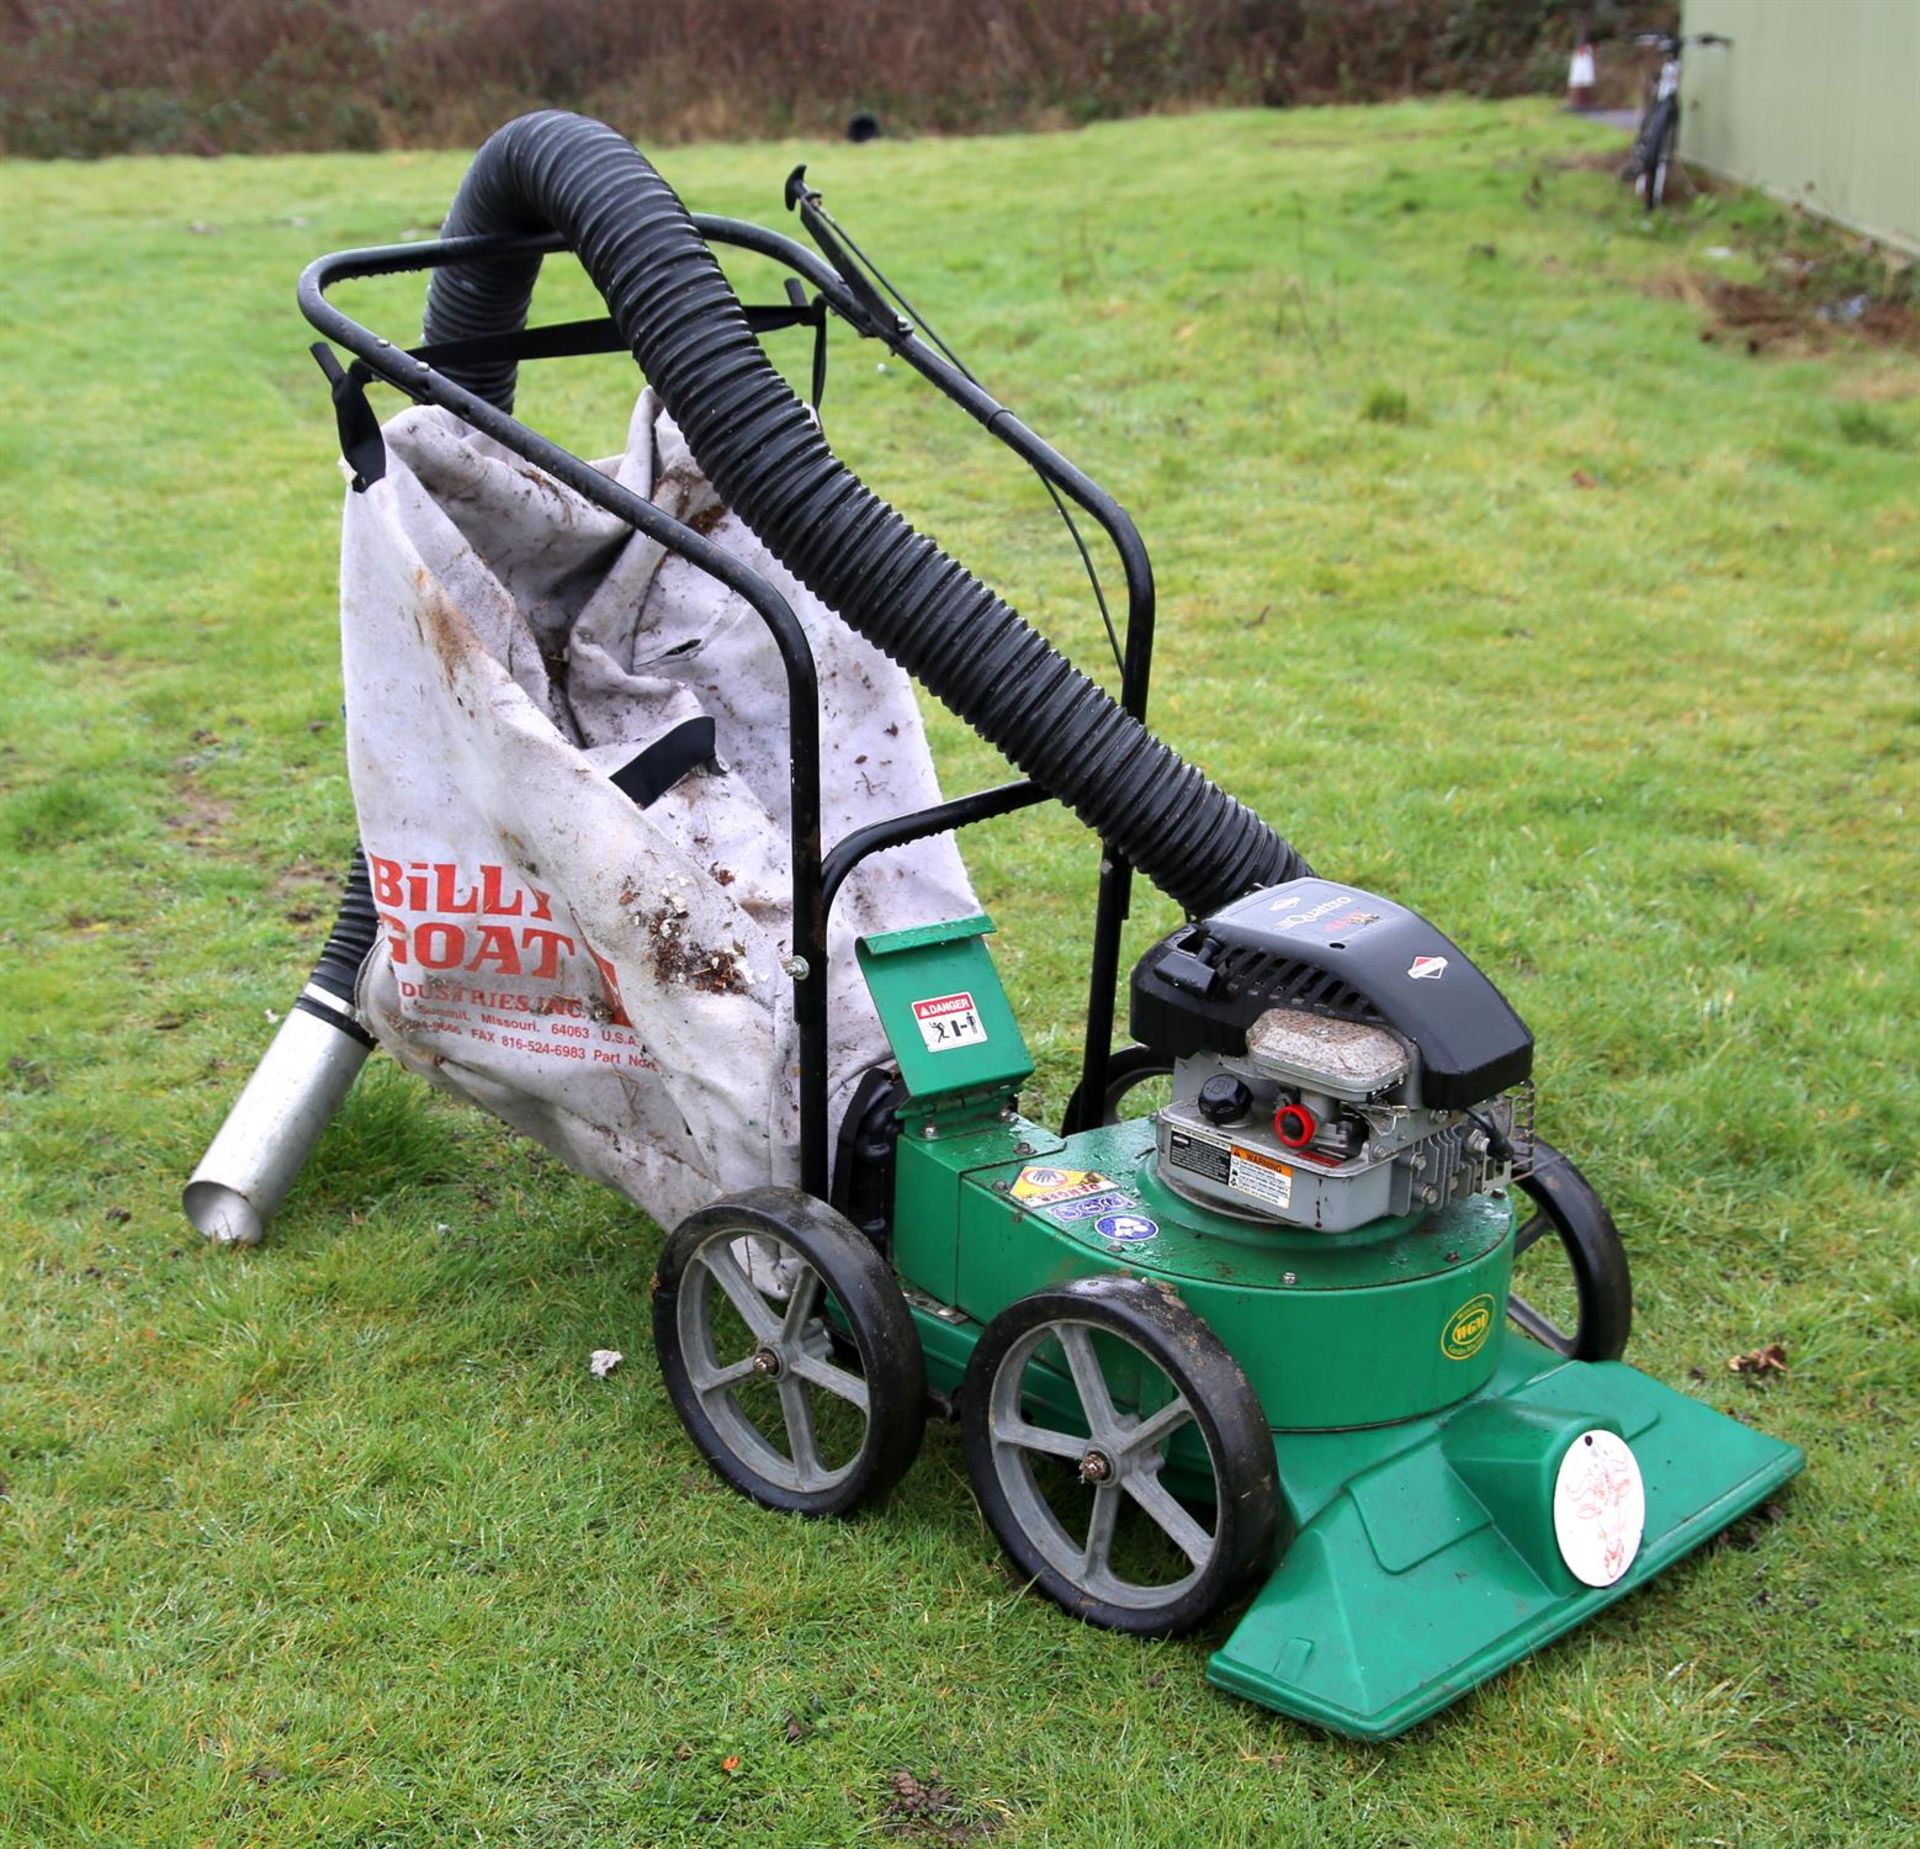 A Quattro/Briggs and Stratton grass mower, together with a Billy goat Industries collection bag and